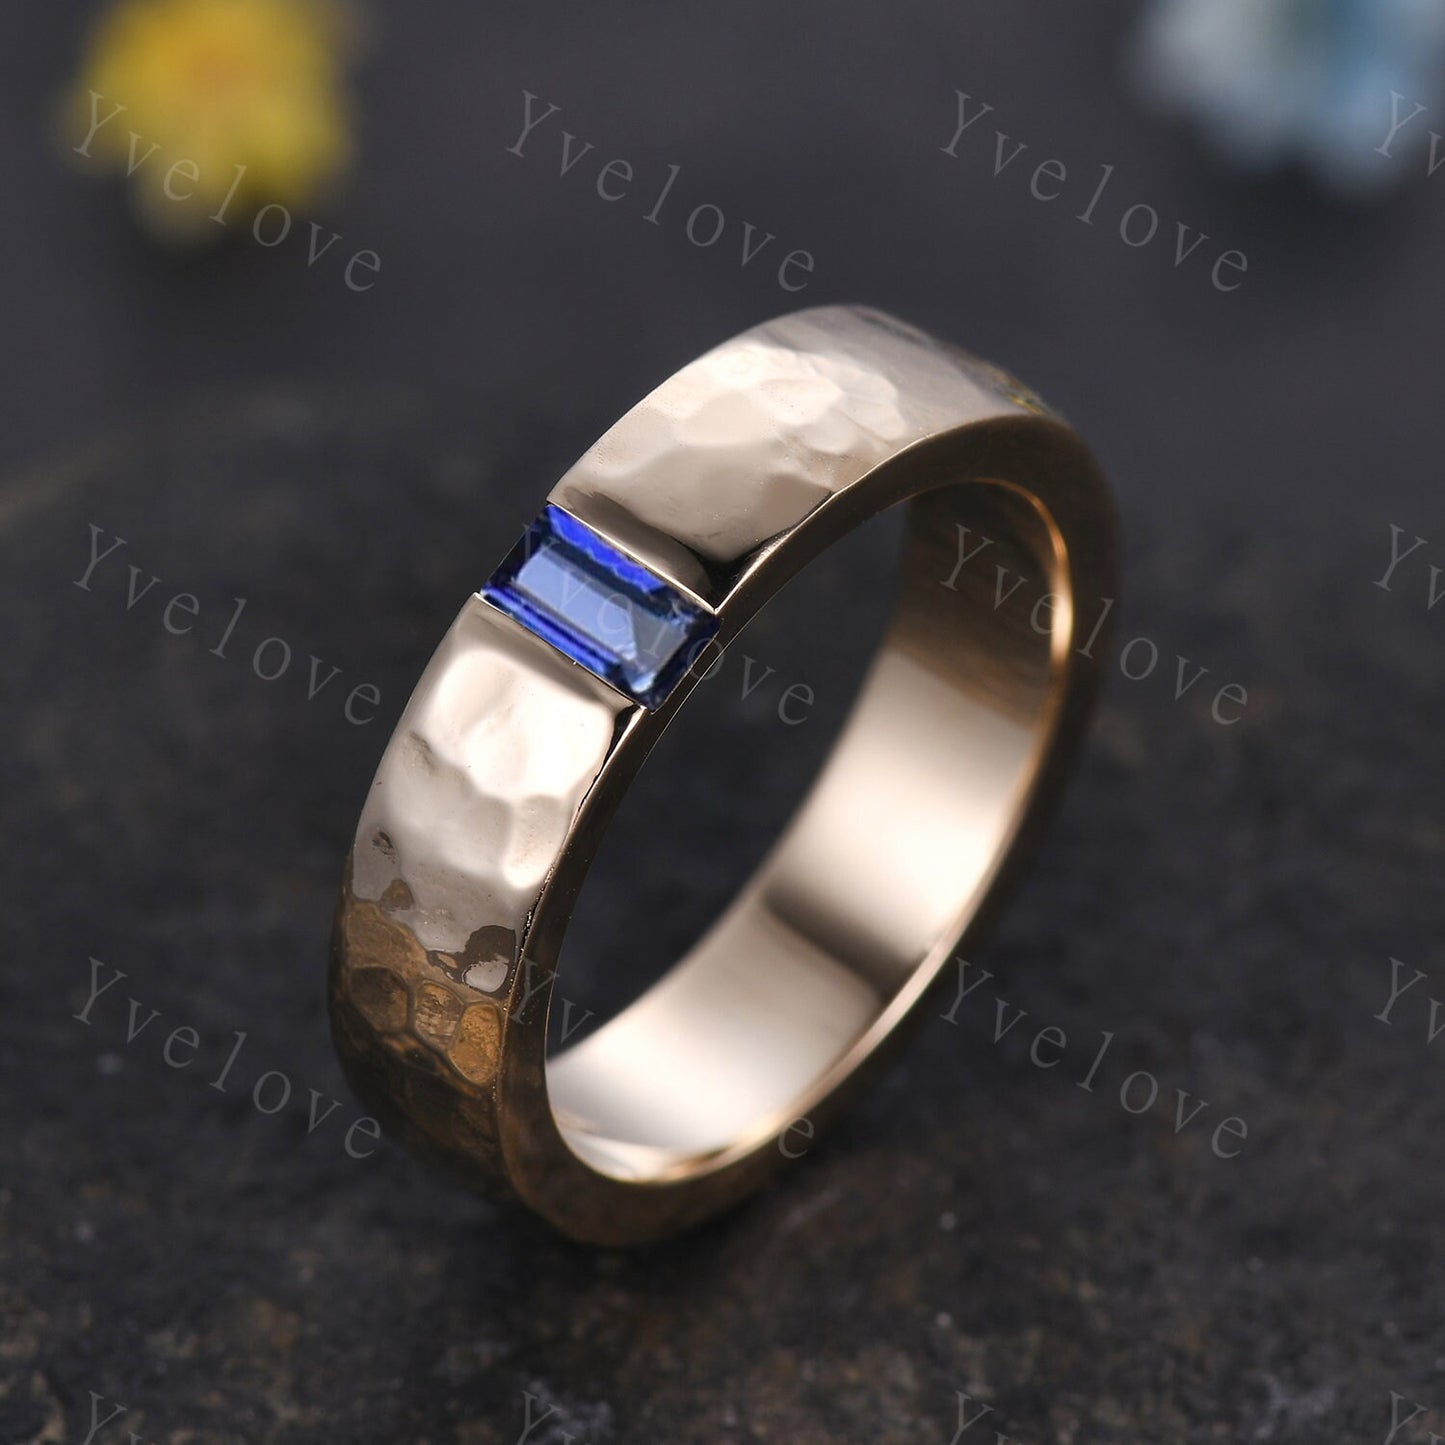 Mens Sapphire Wedding Band Baguette Cut Blue Sapphire Band 5mm Solid White Ring Mens Hammered Stacking Matching Band Retro Vintage Ring Gift